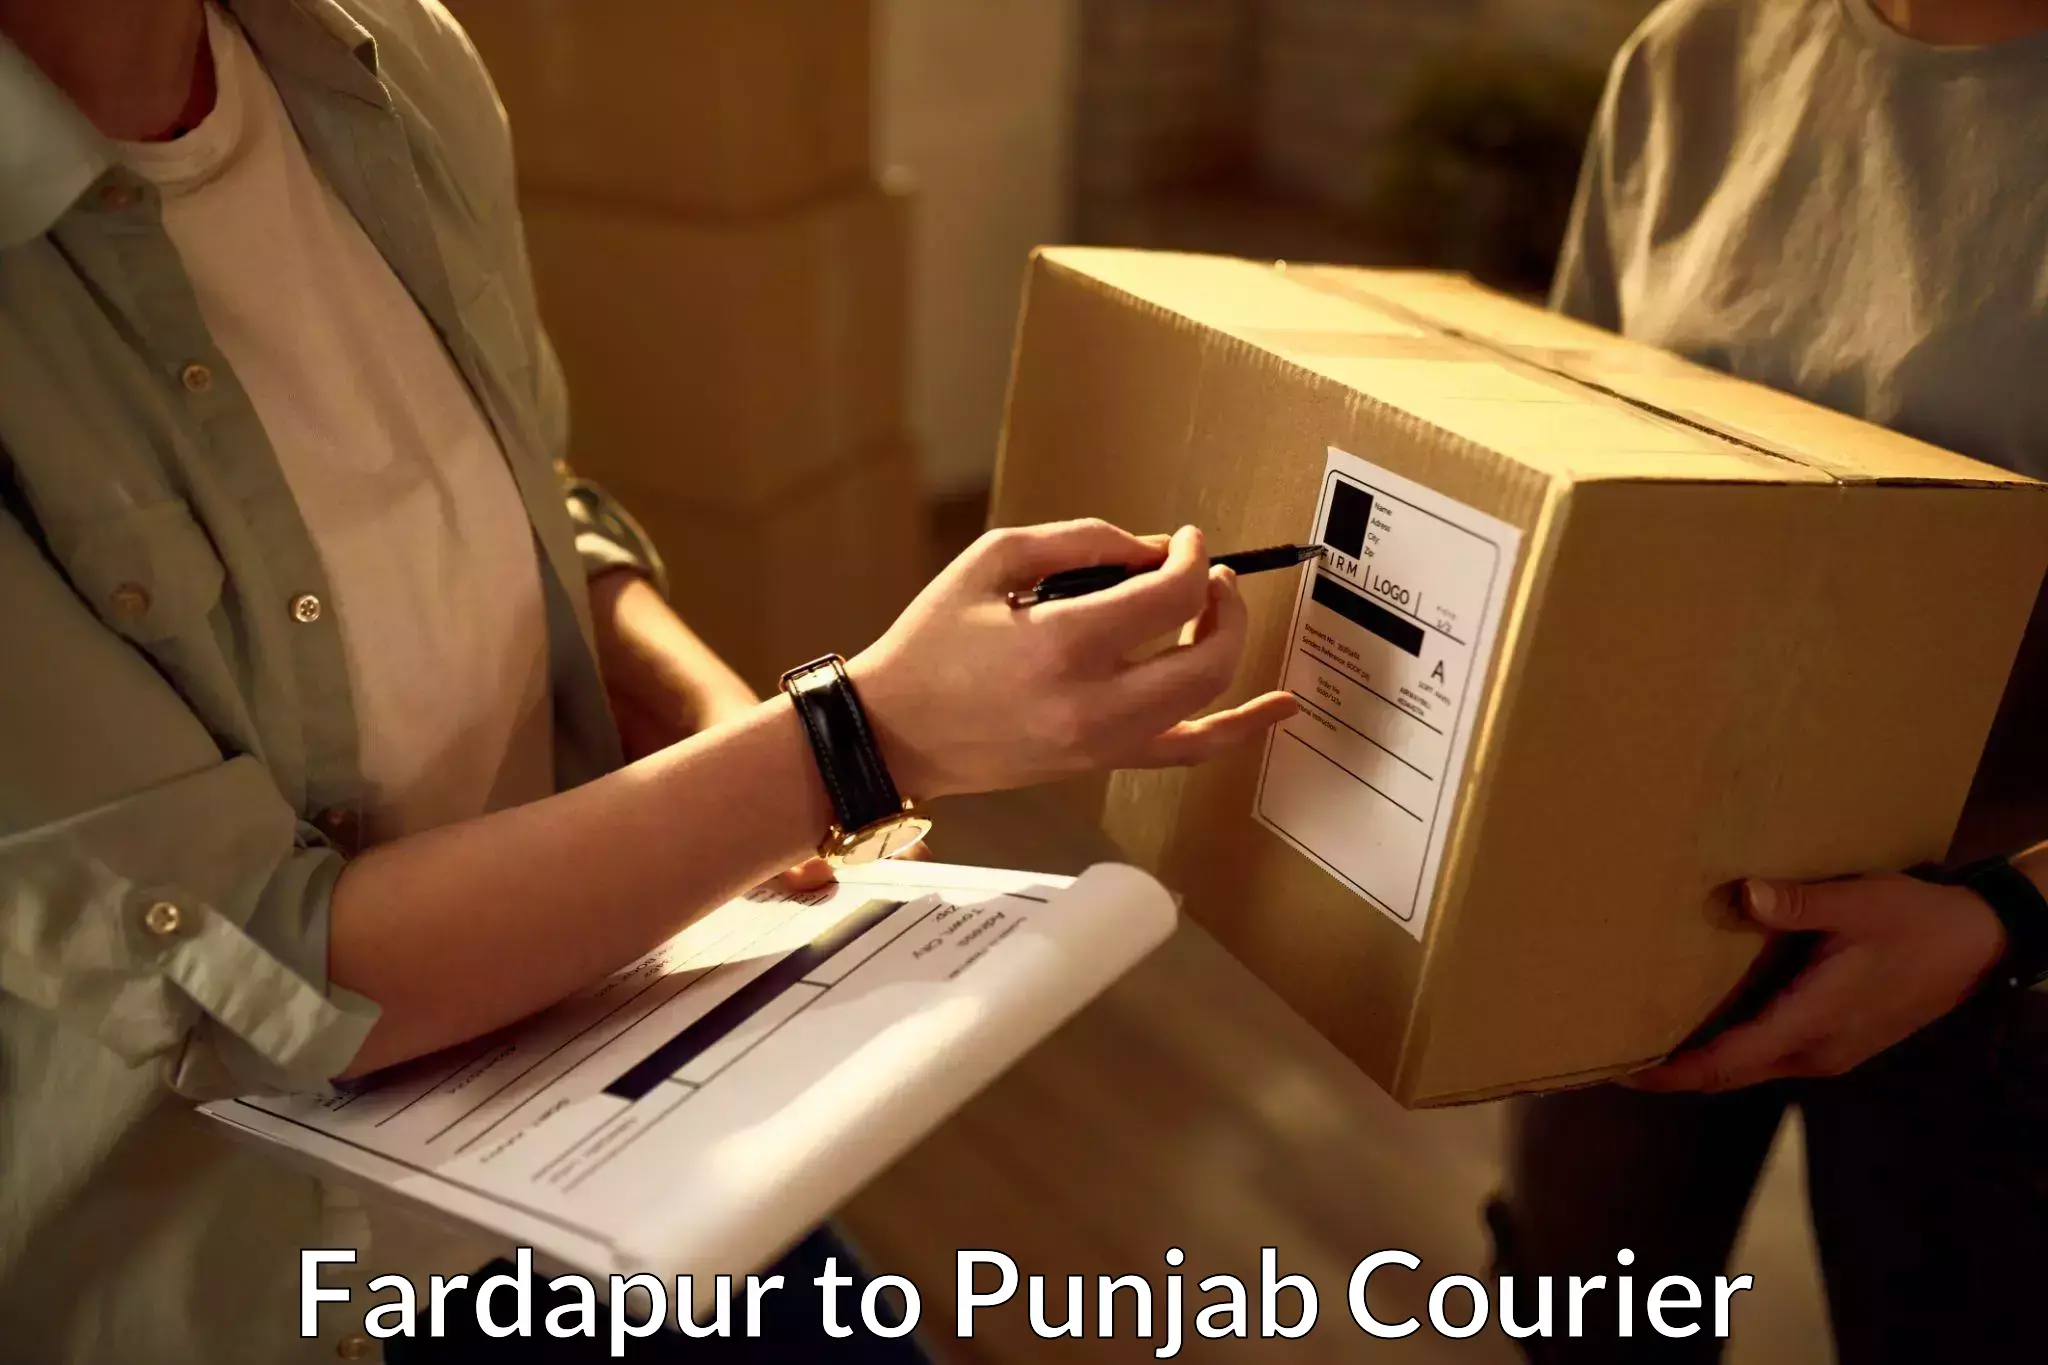 On-call courier service Fardapur to Central University of Punjab Bathinda